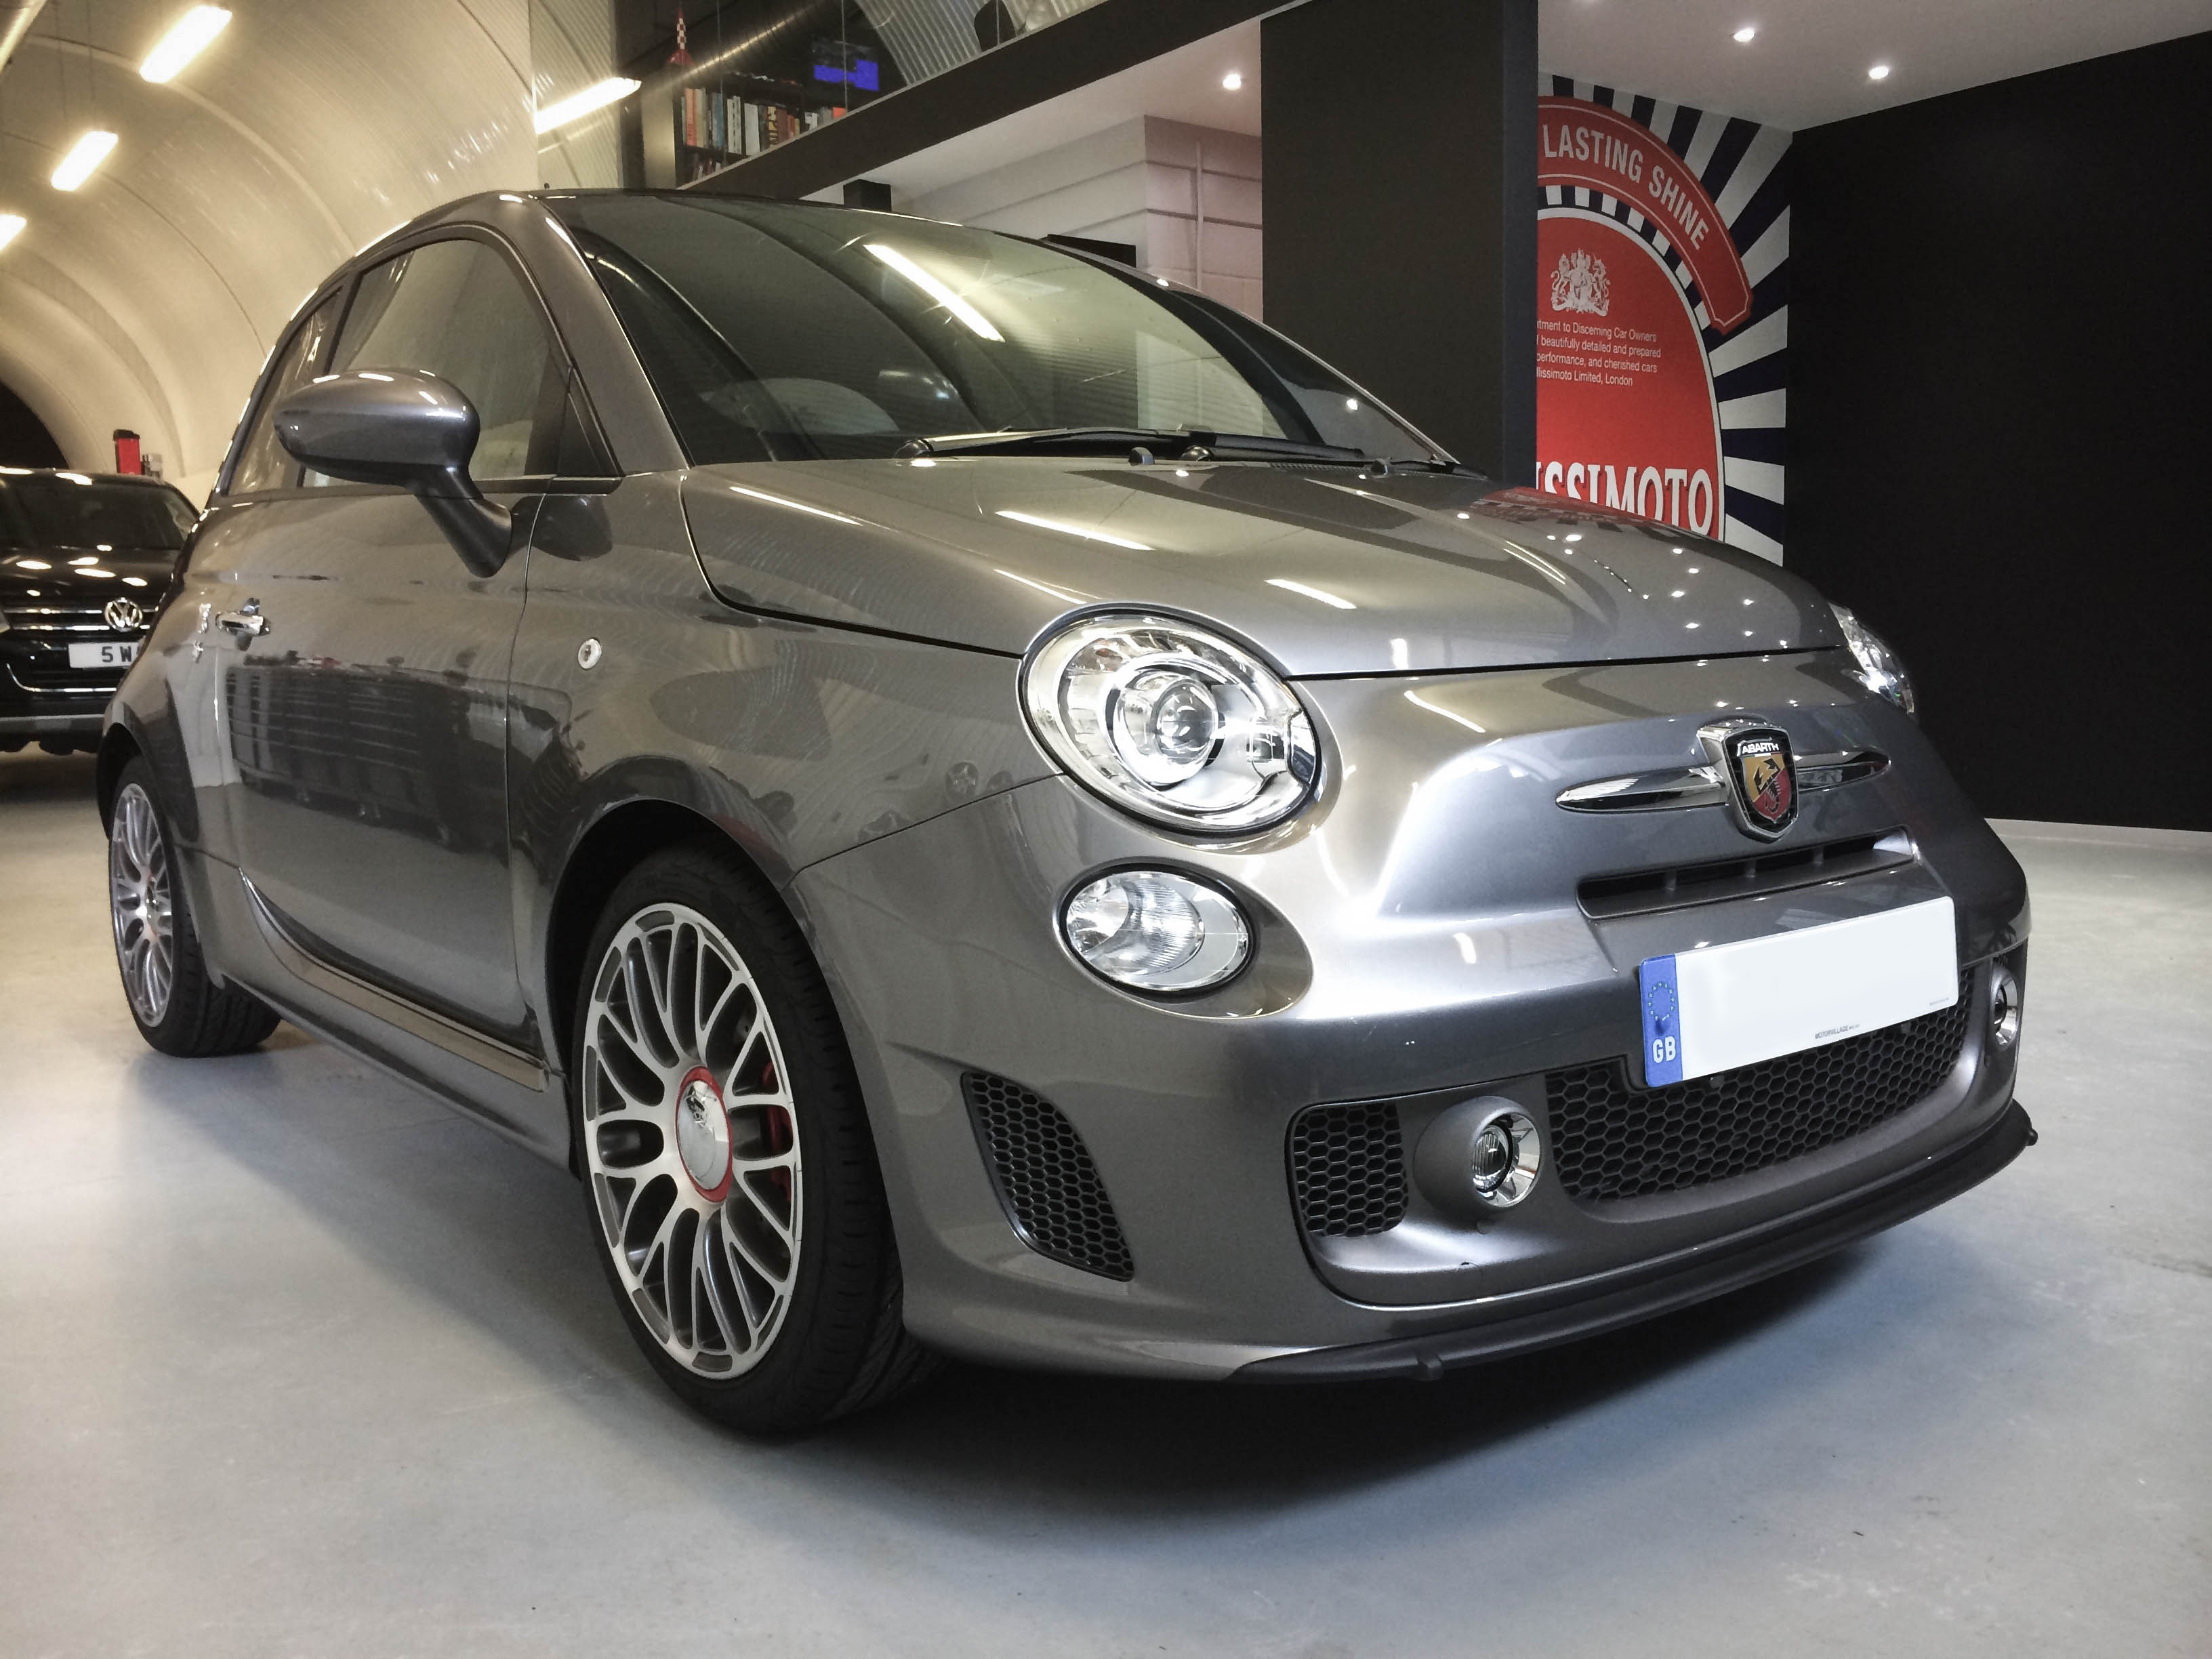 Fiat Abarth – Front